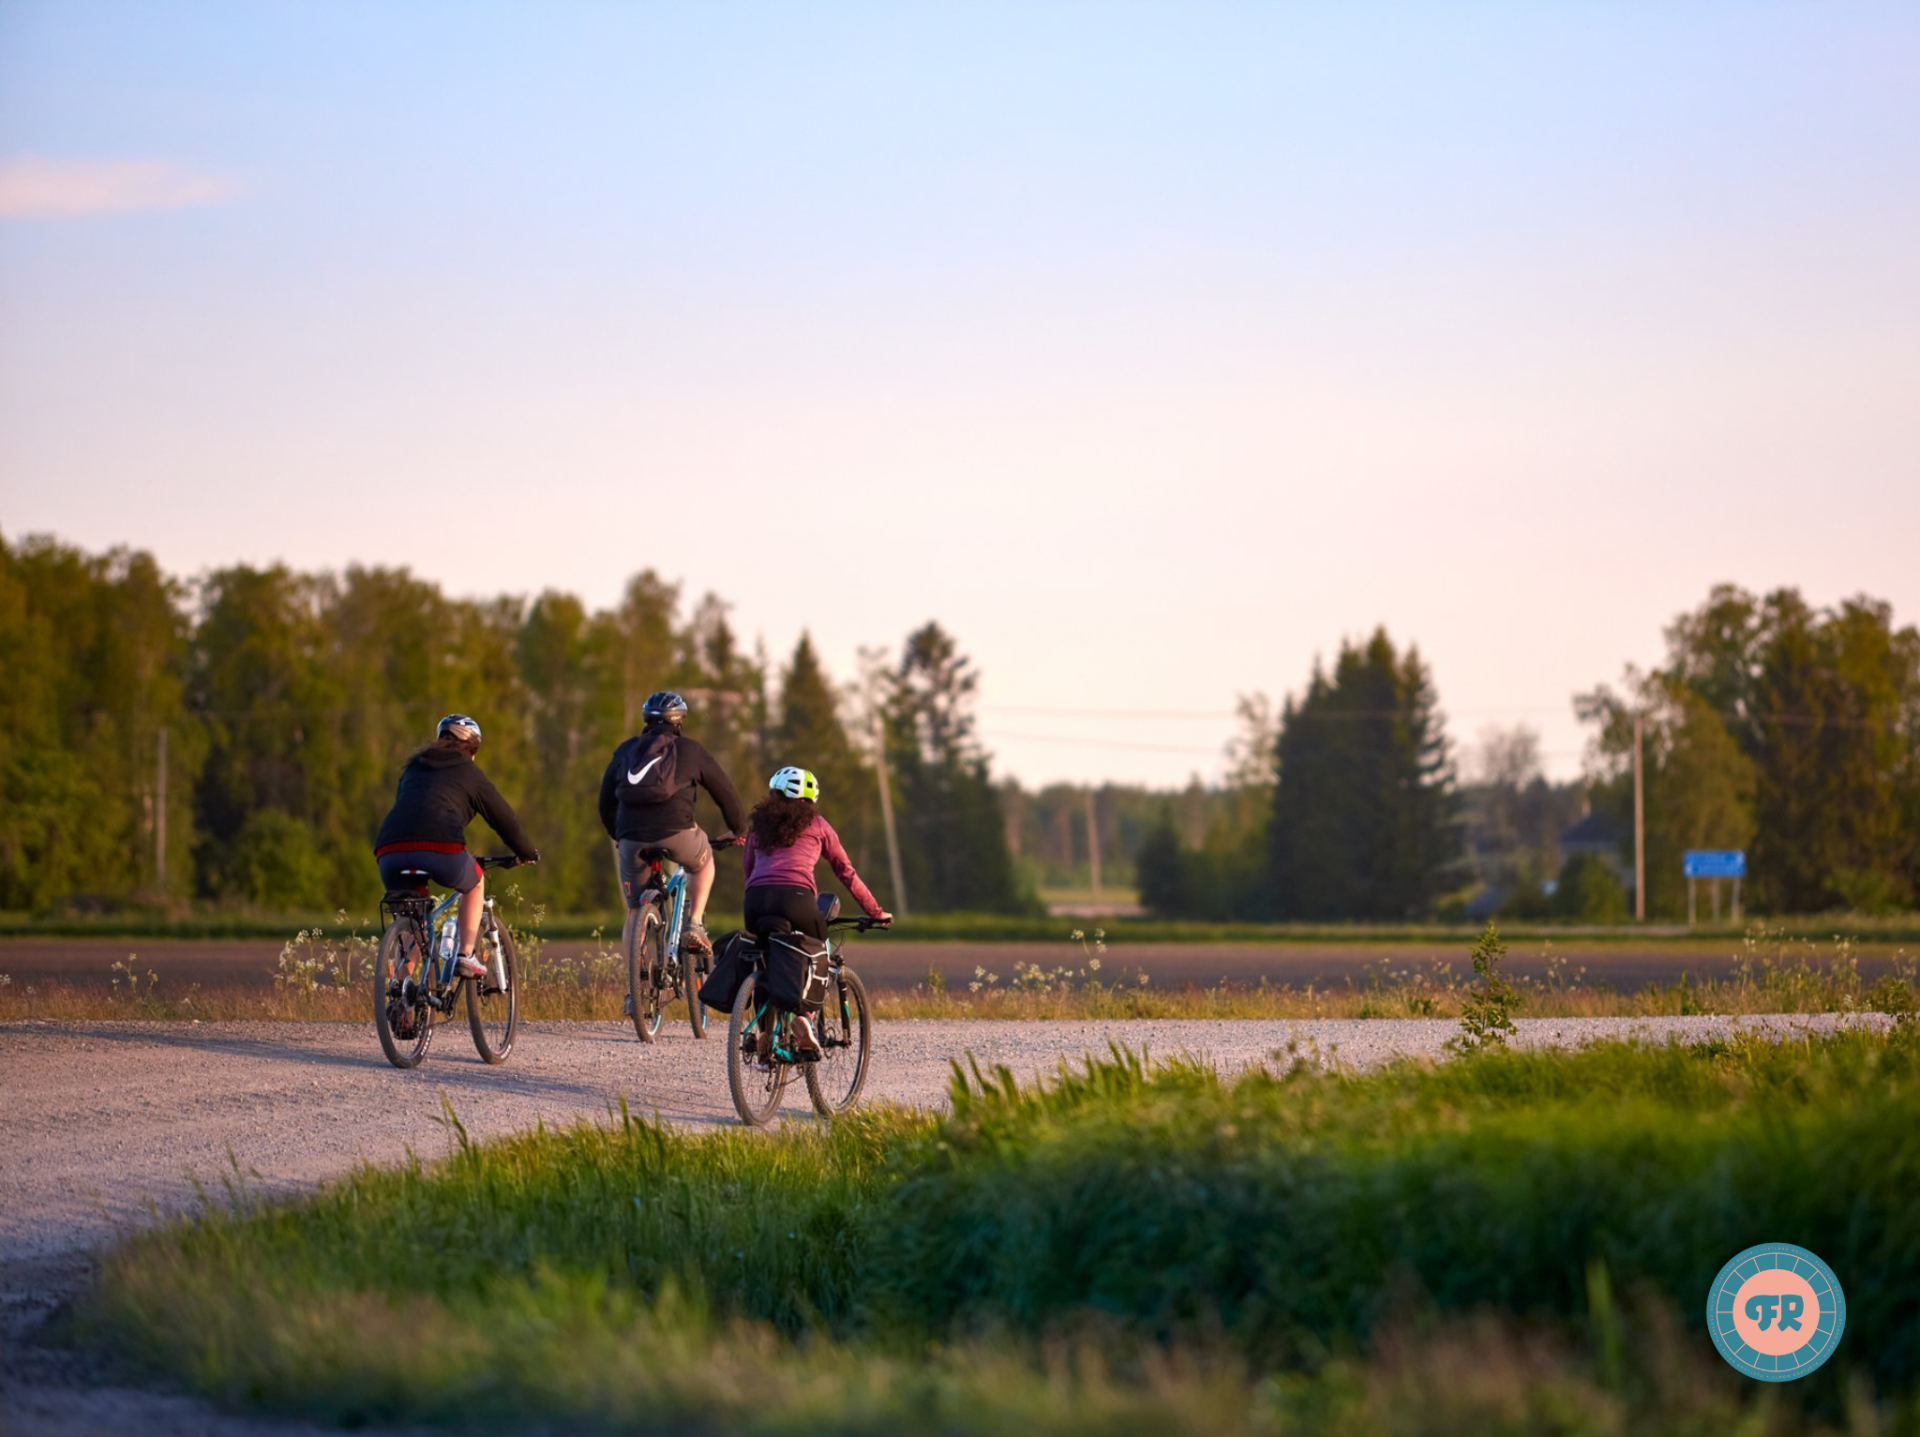 Cyclists riding on the dirt road.